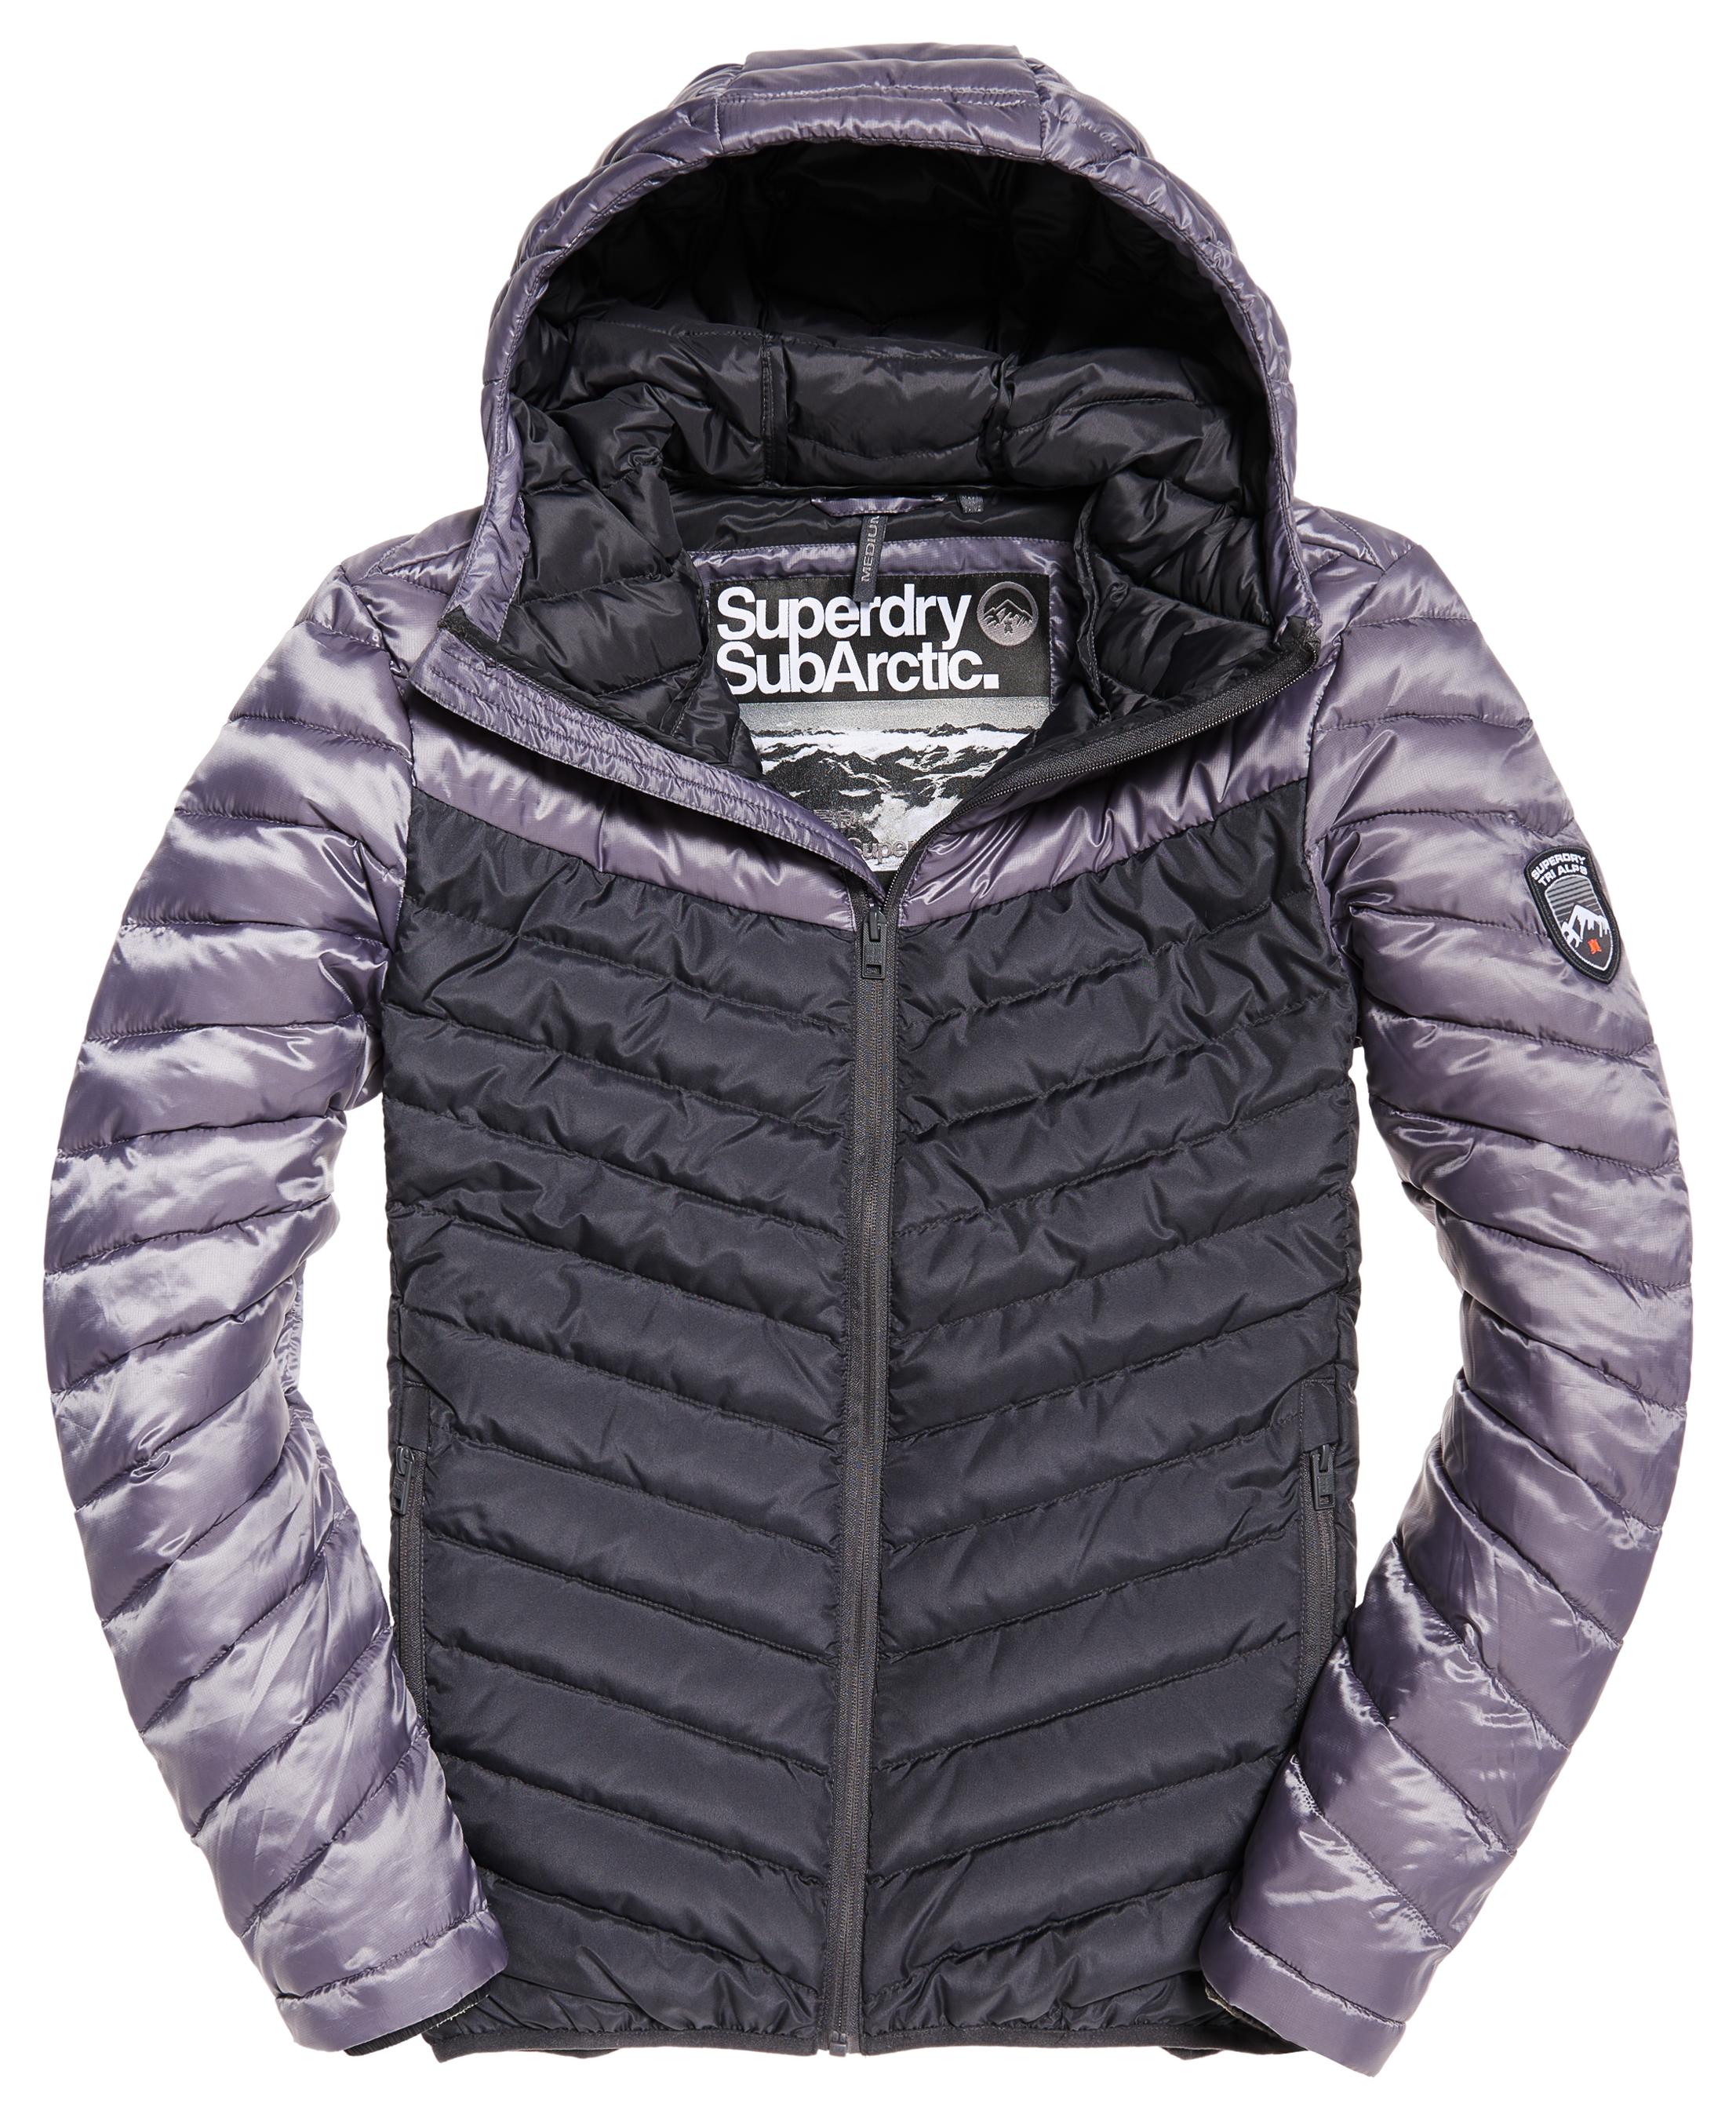 Superdry Offers Style and Functionality in their AW17 Collection ...